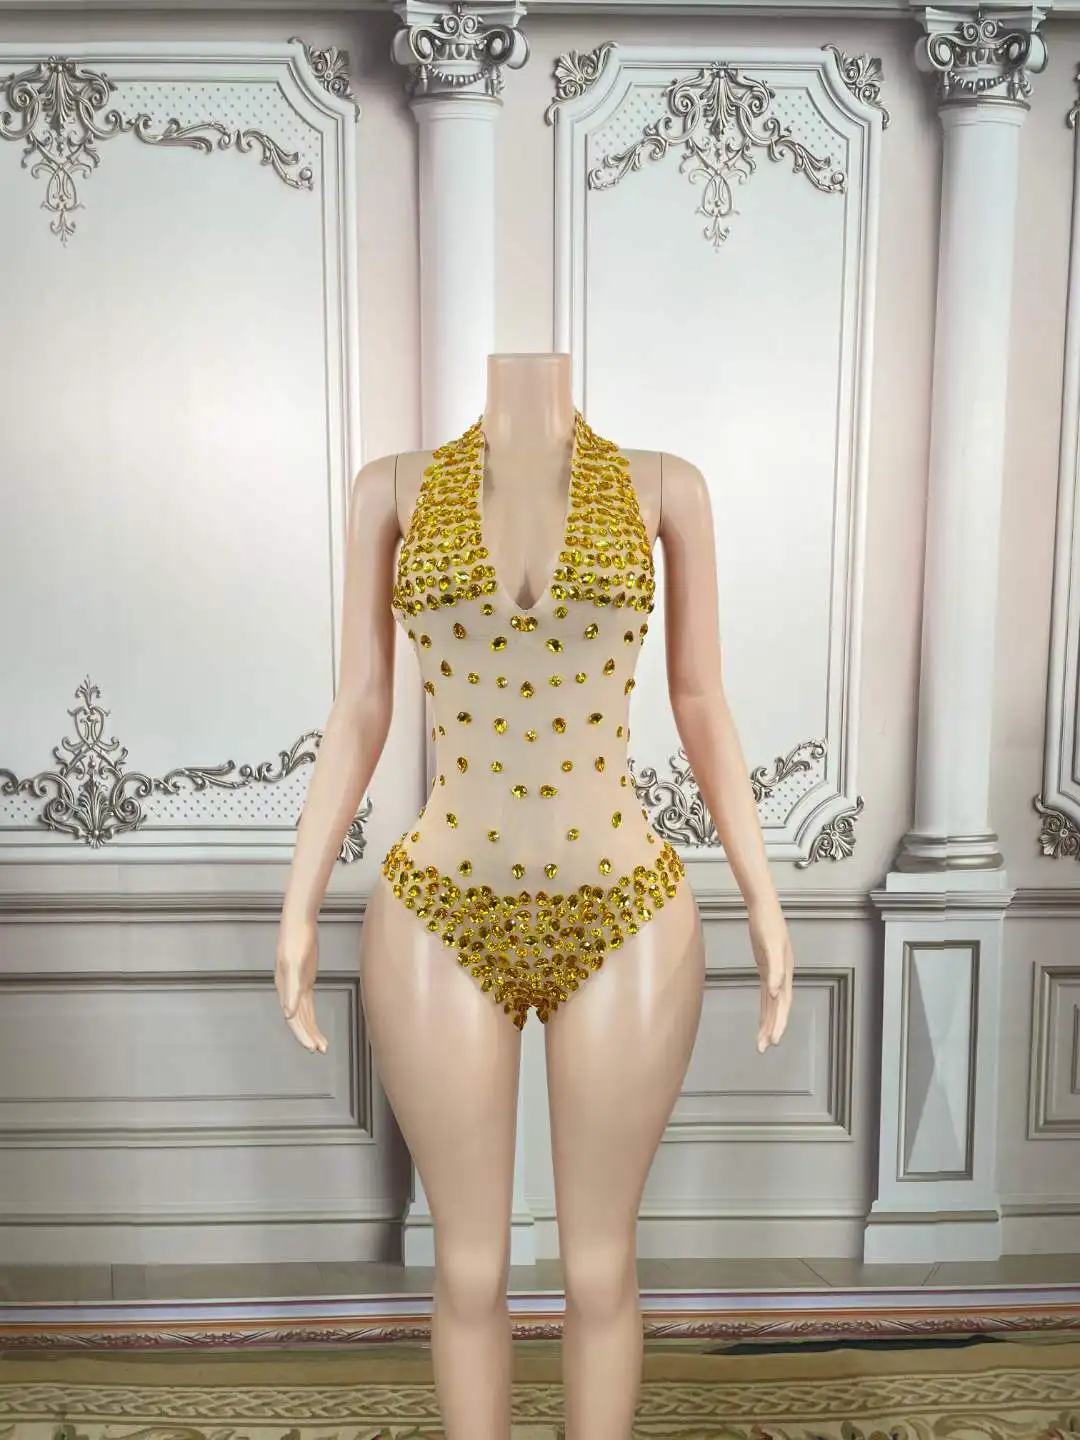 Gems Rhinestone Shining Bodysuits For Women Backless Halter V Neck Gold Sleeveless Drag Queen Outfit 2022 Sparkly Leotard